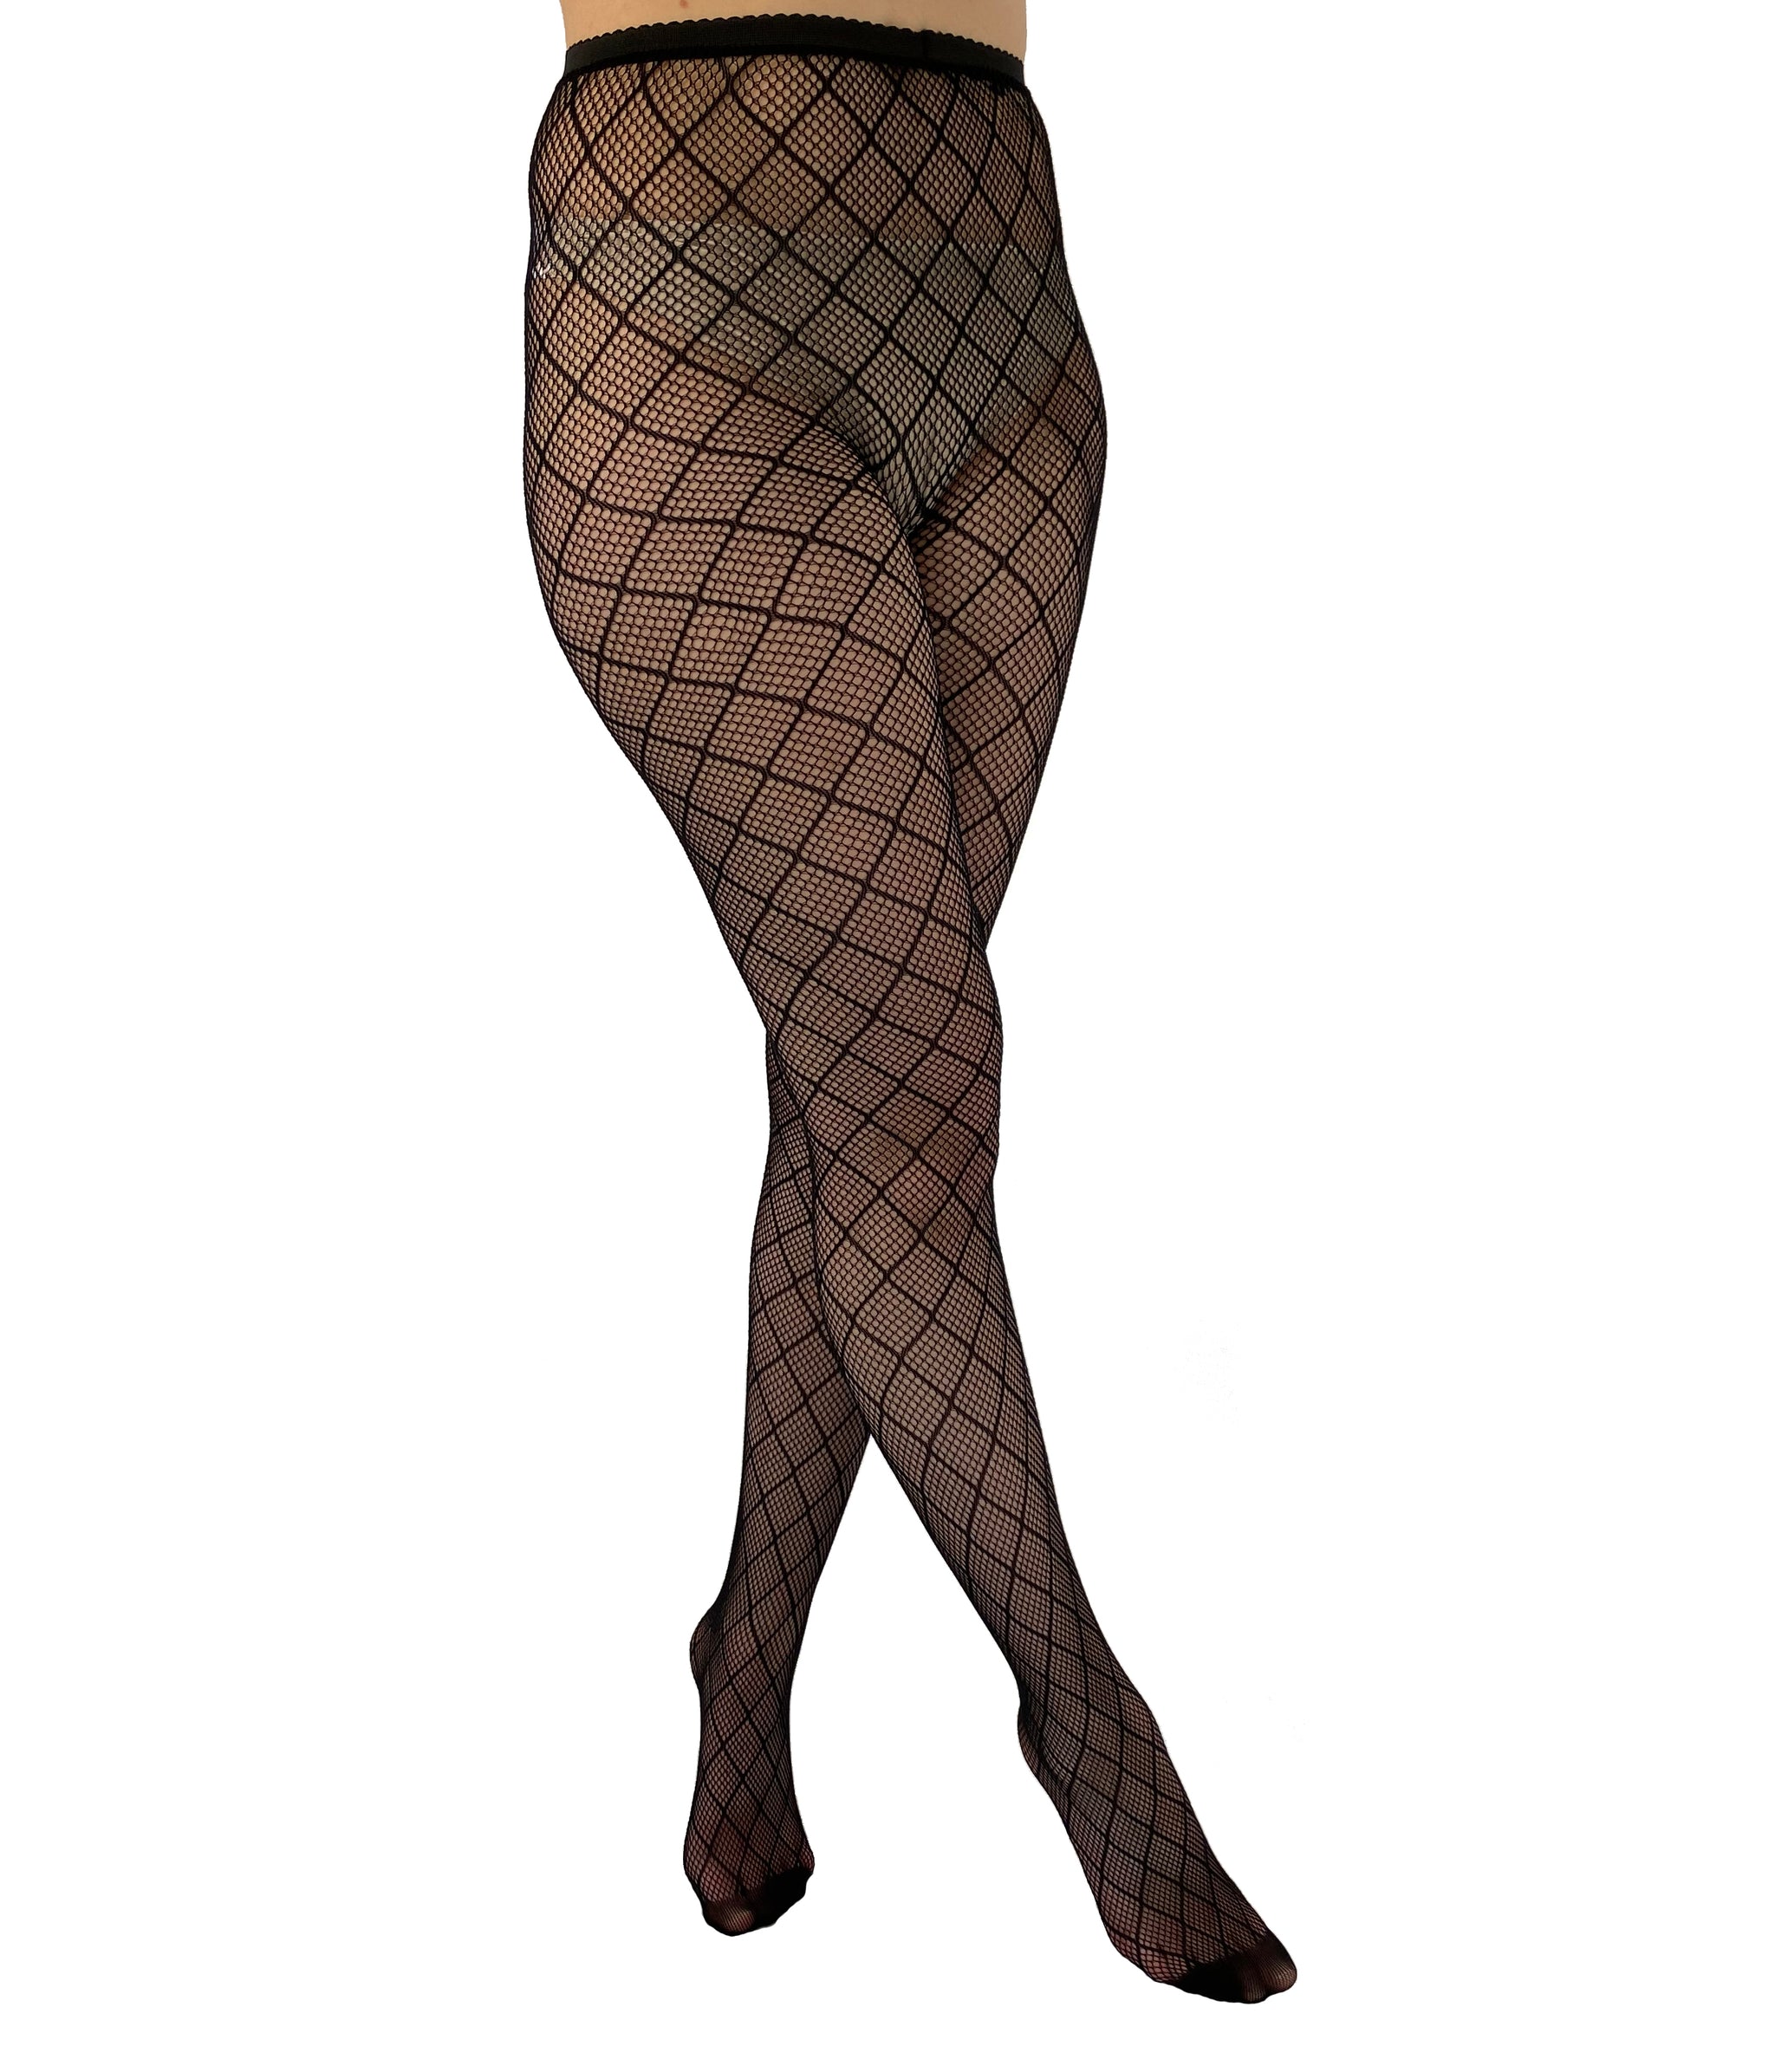 Pamela Mann Orchid Leaf Net Tights In Stock At UK Tights